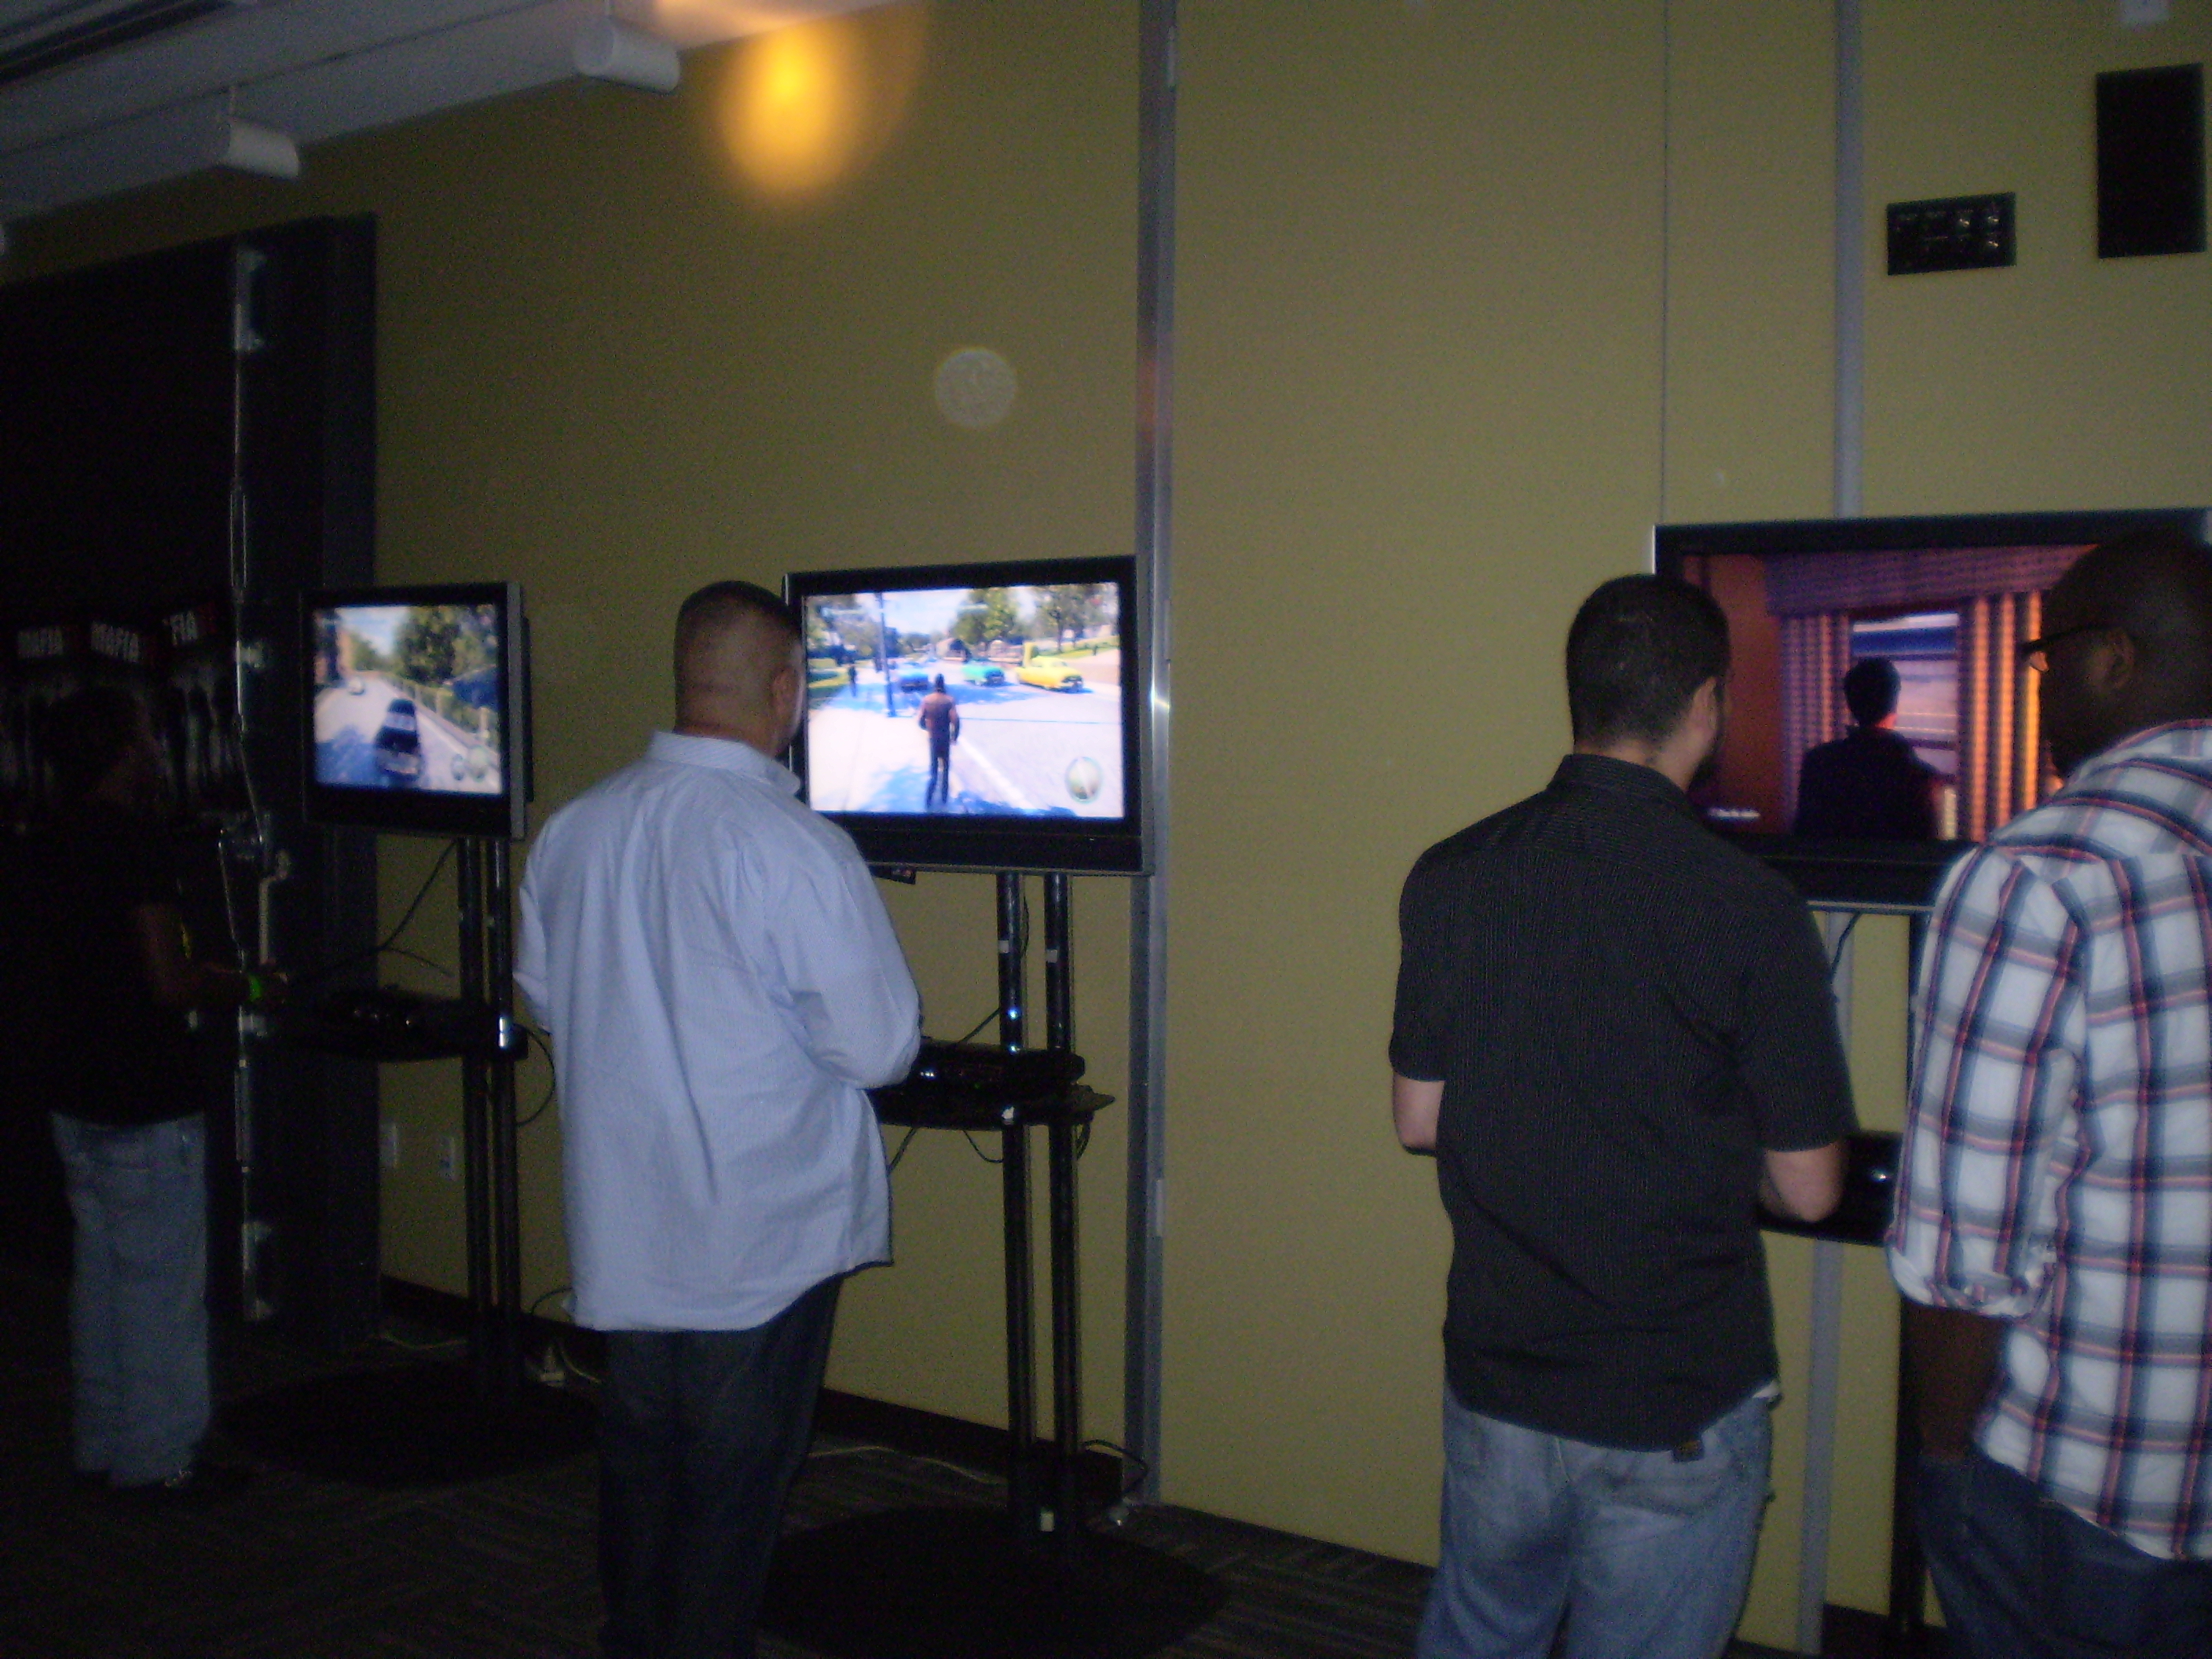 Attendees play Mafia II on the PS3.